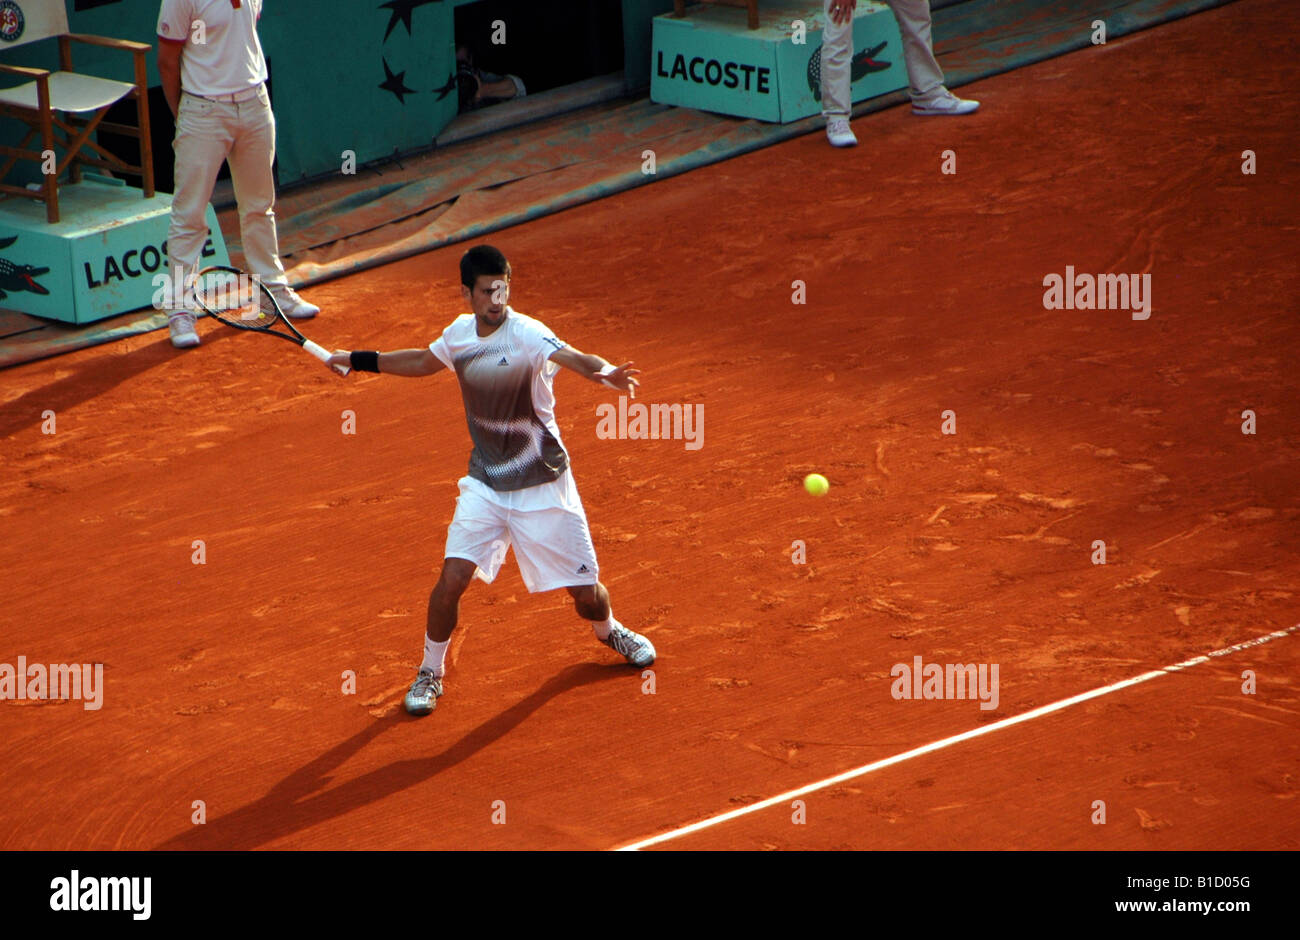 Novak Djokovic hitting a forehand groundstroke at Rolland Garros during the 2008 French Open Stock Photo